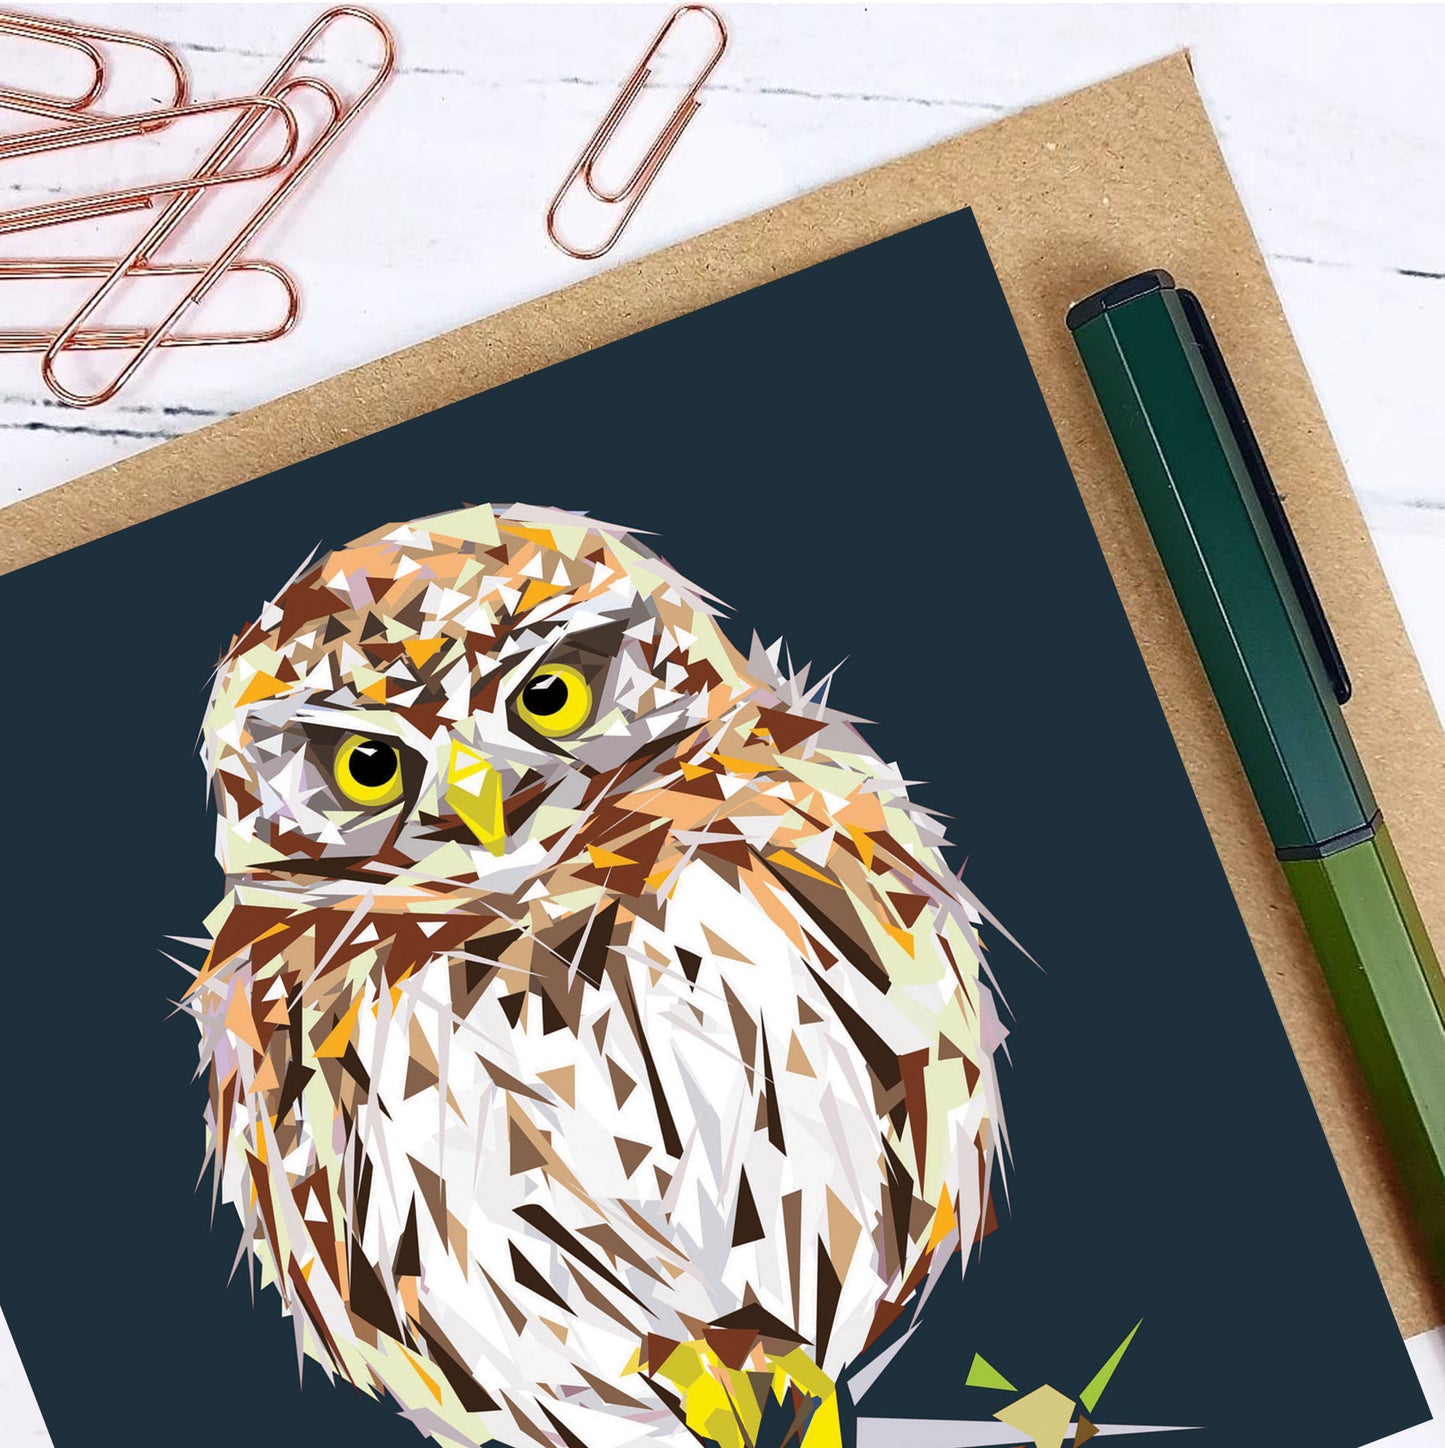 LITTLE OWL greeting card